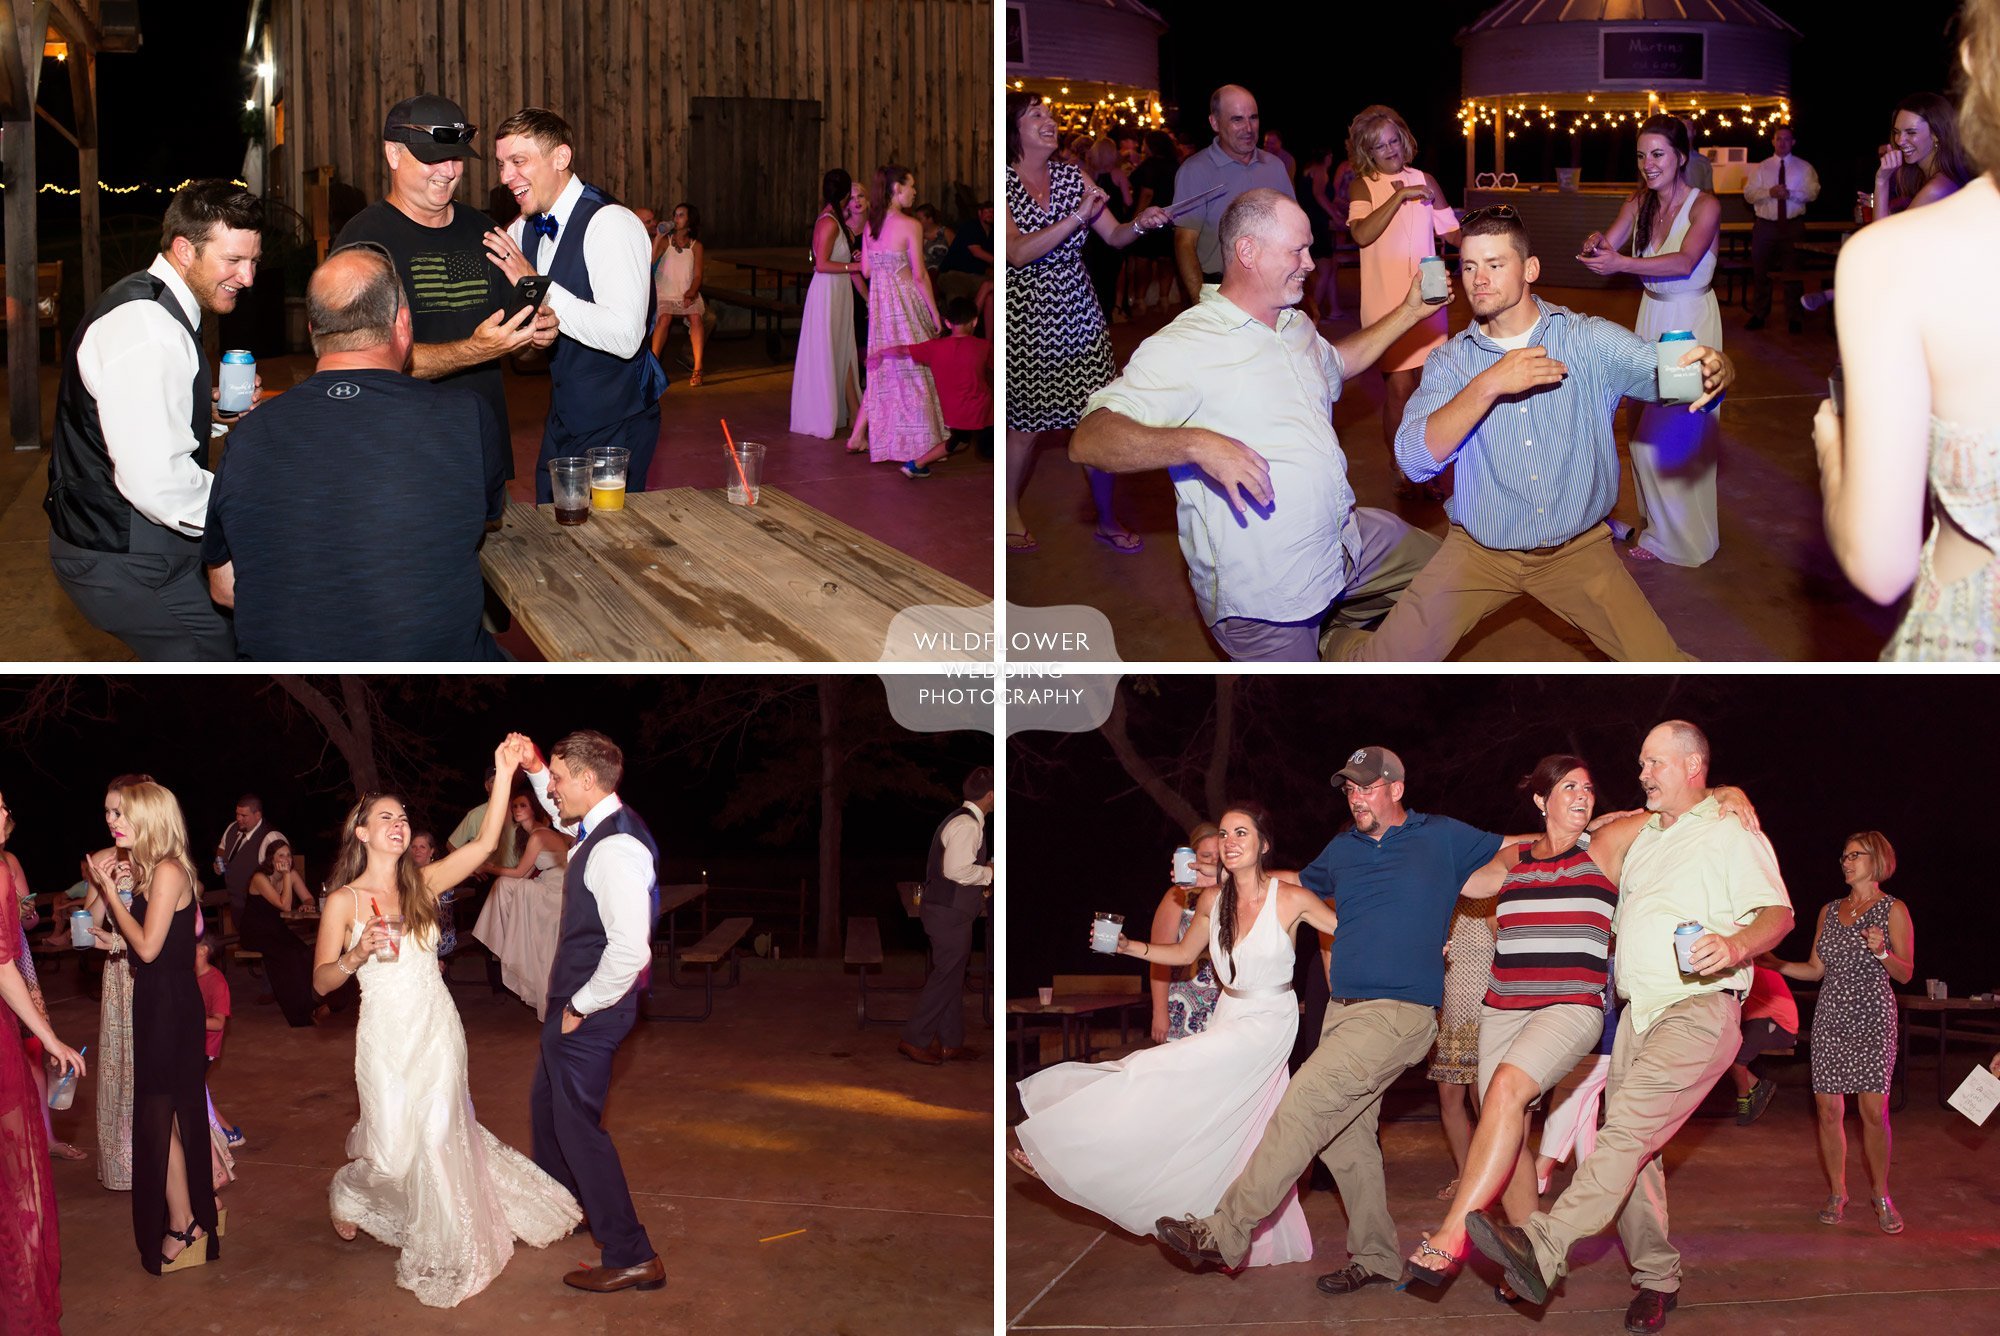 Wedding guests dance on the outdoor patio at Kempker's Back 40 barn venue in Westphalia.